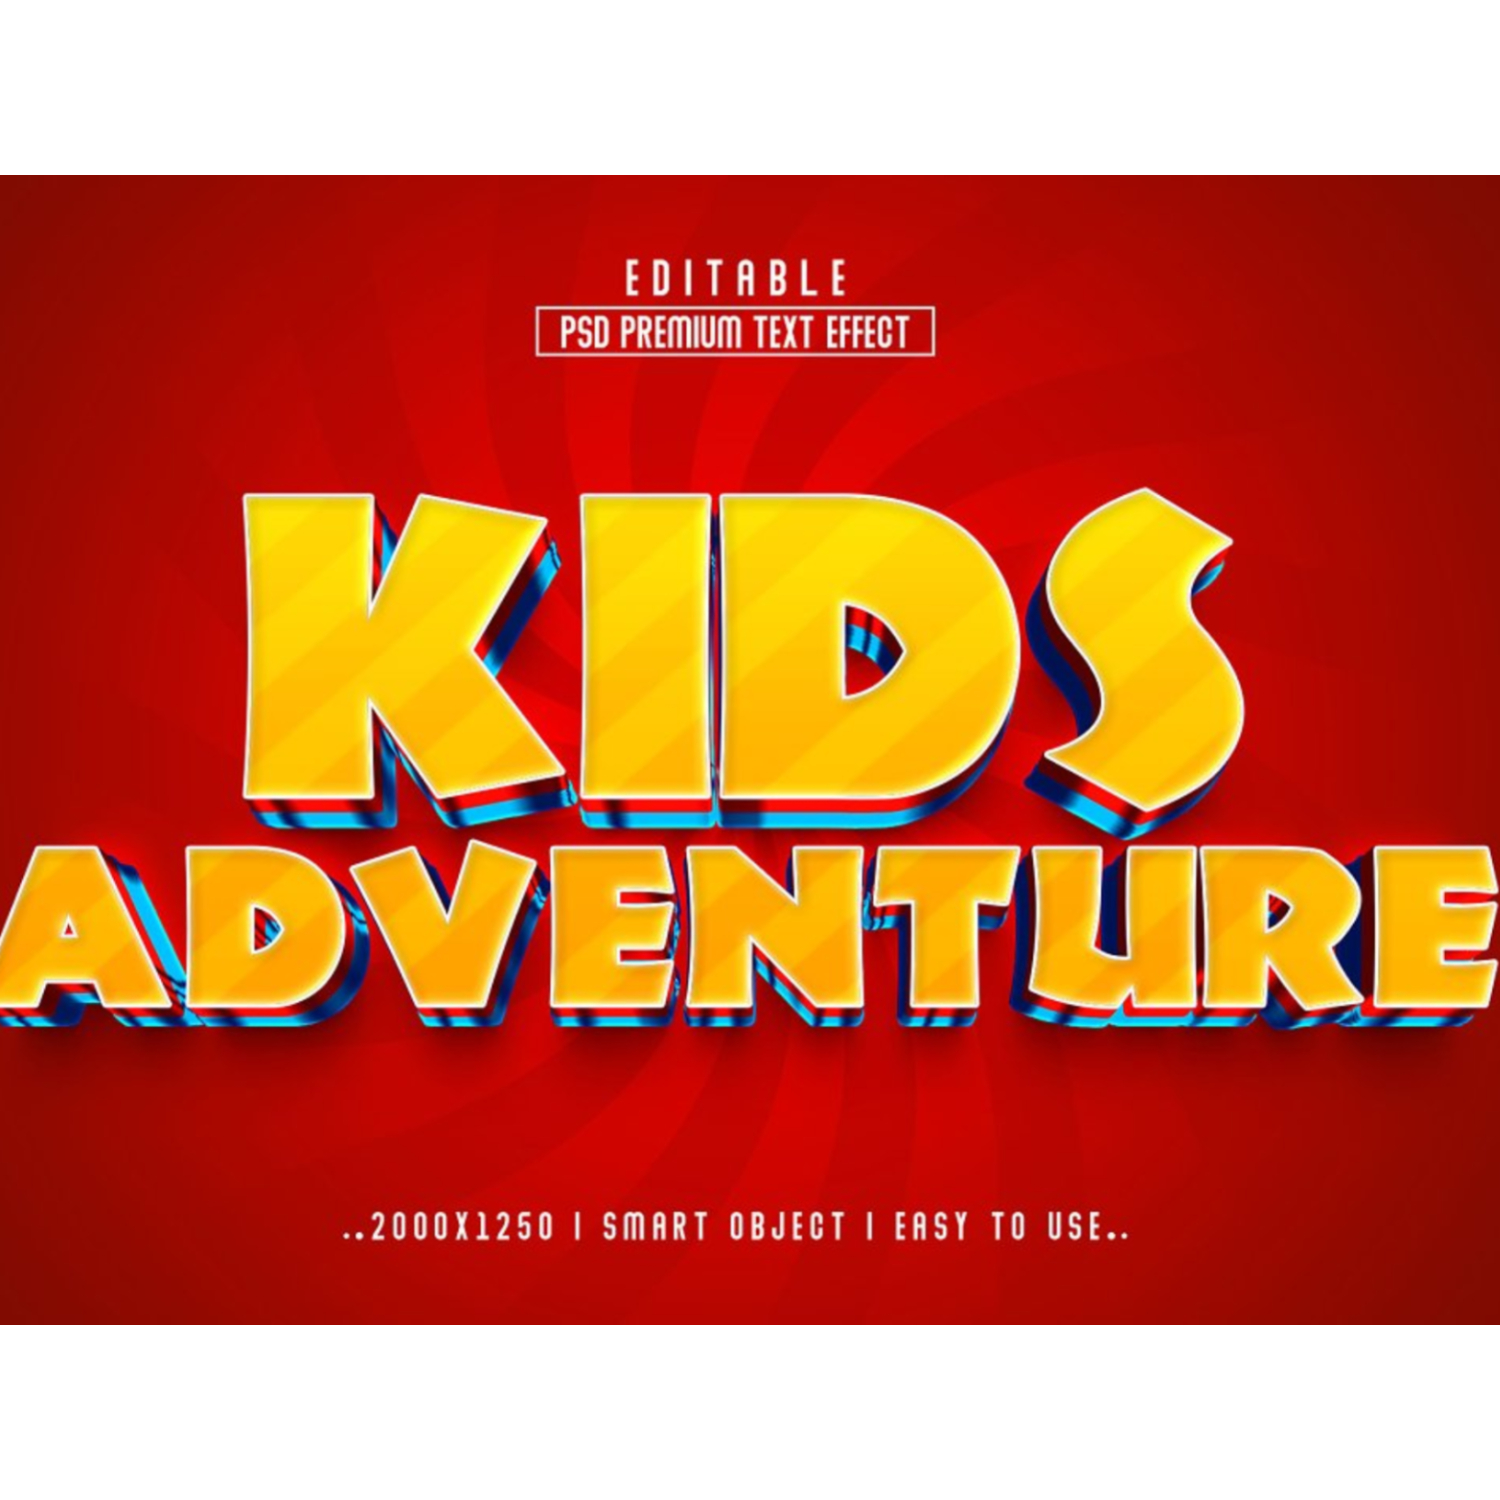 Kids's adventure font with a red background.